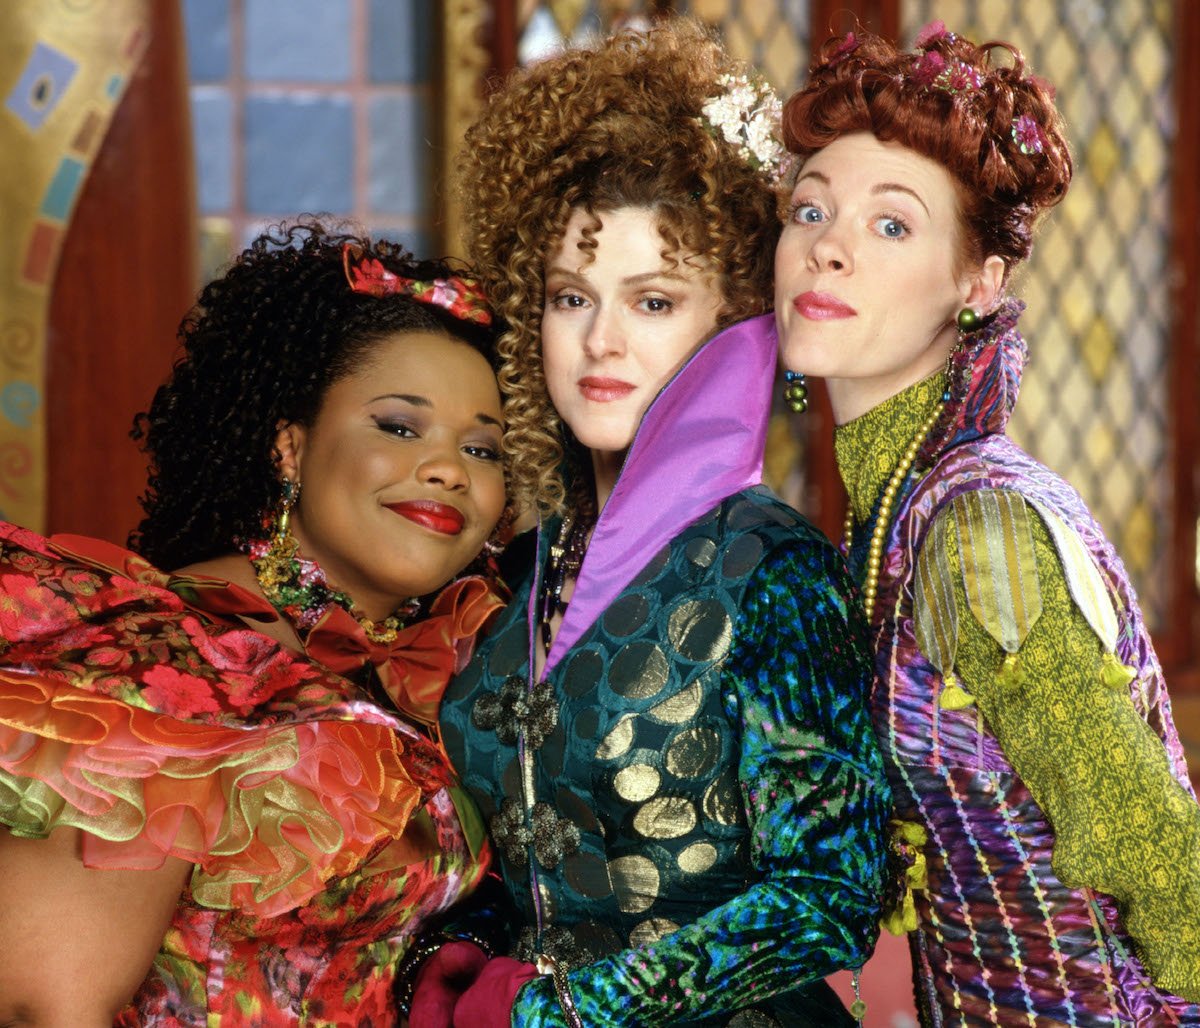 Natalie Desselle-Reid as Minerva, Bernadette Peters as the Evil Stepmother, and Veanne Cox as Calliope (L-R) in 'Rodgers and Hammerstein's Cinderella' on ABC, 1997 | Disney